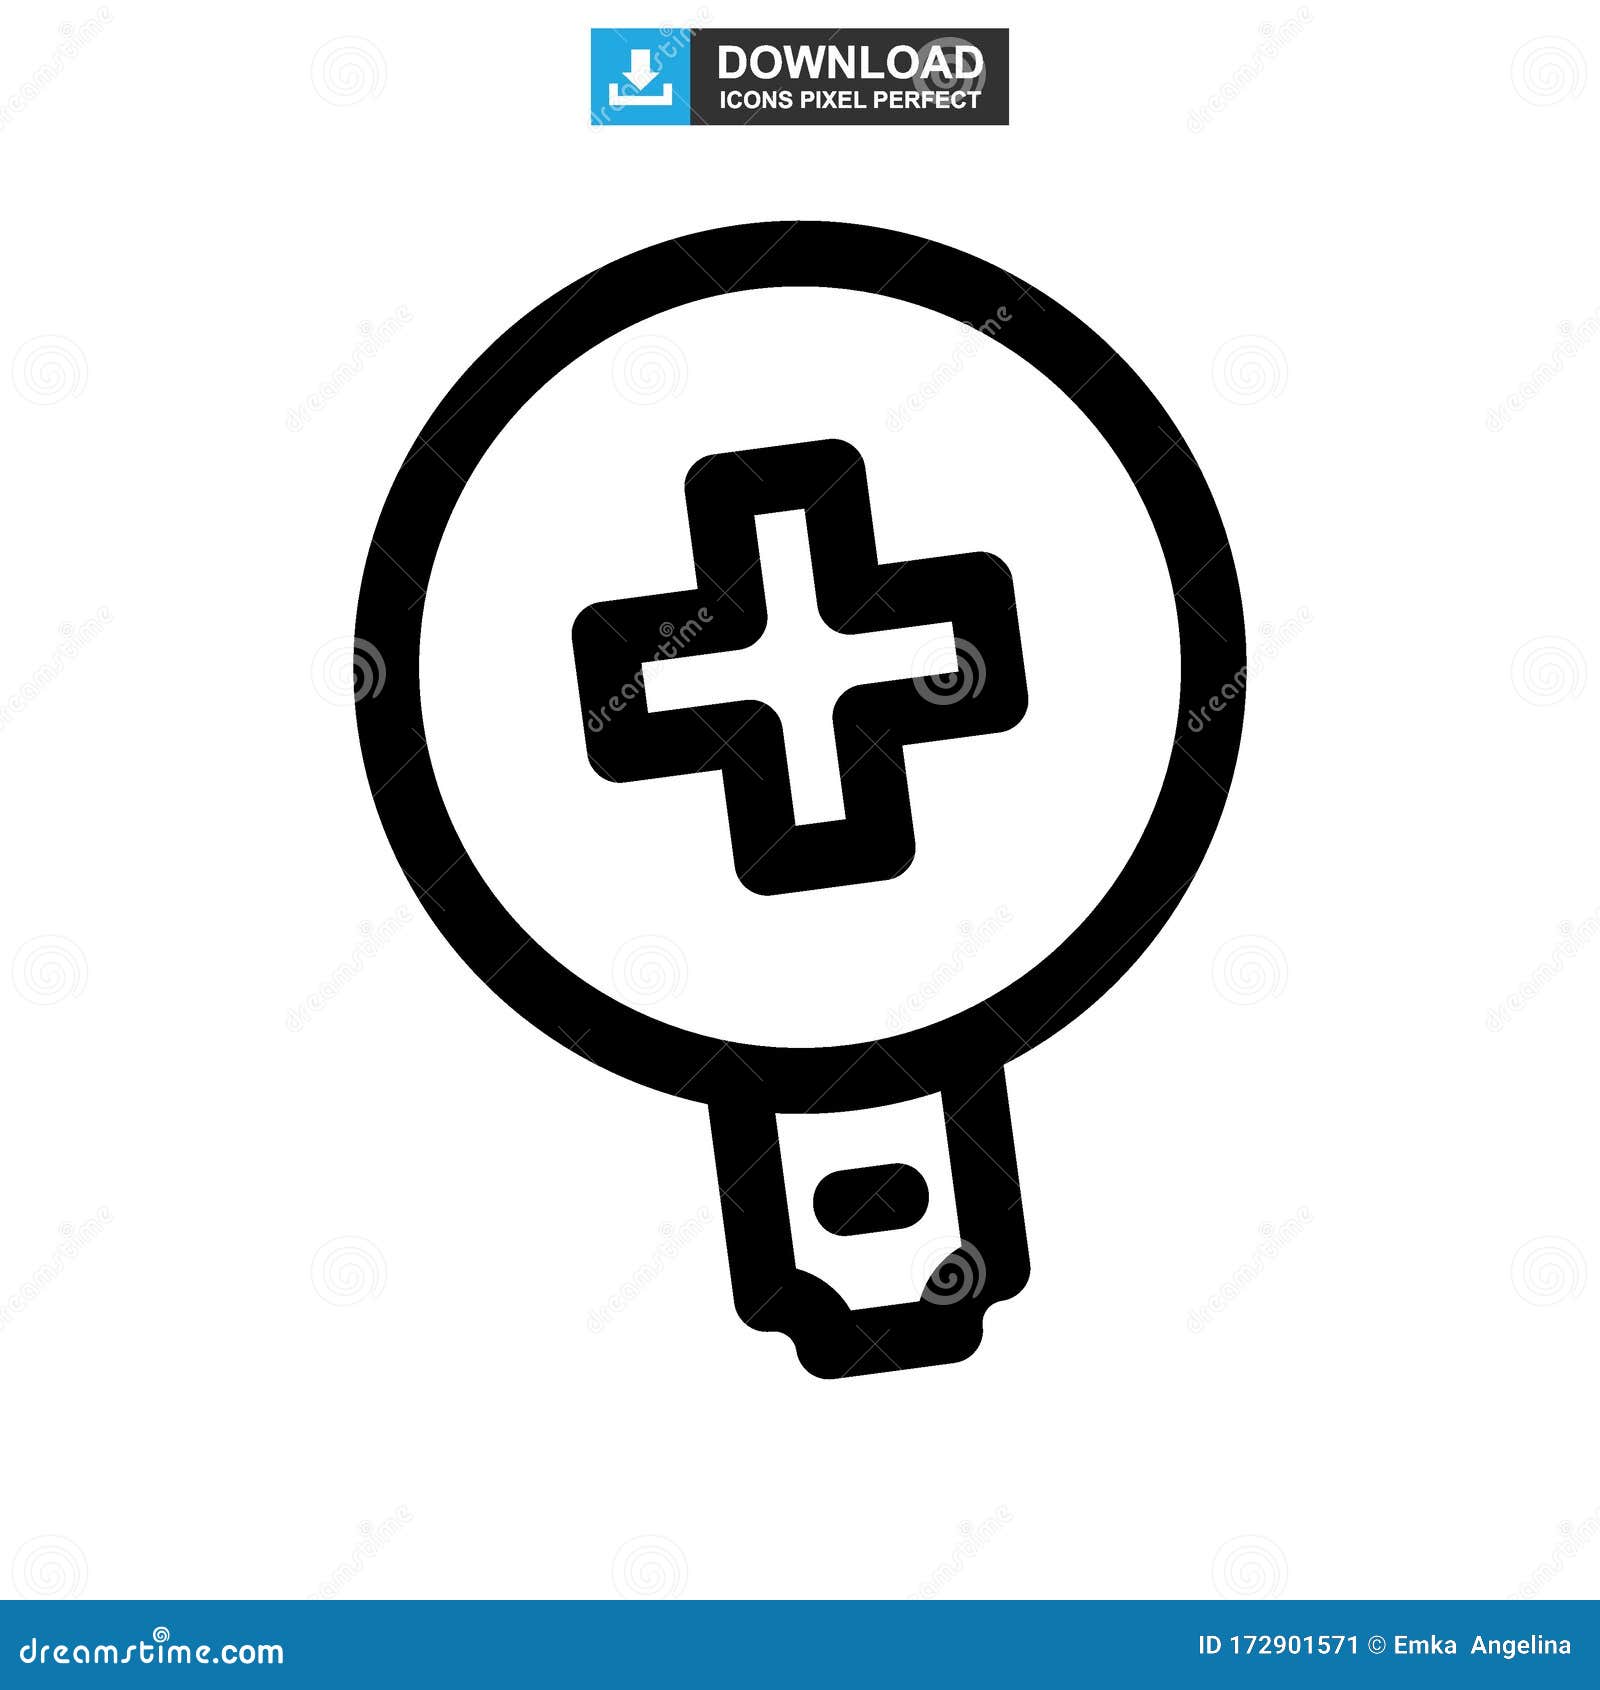 Download Zoom In Icon Or Logo Isolated Sign Symbol Vector ...